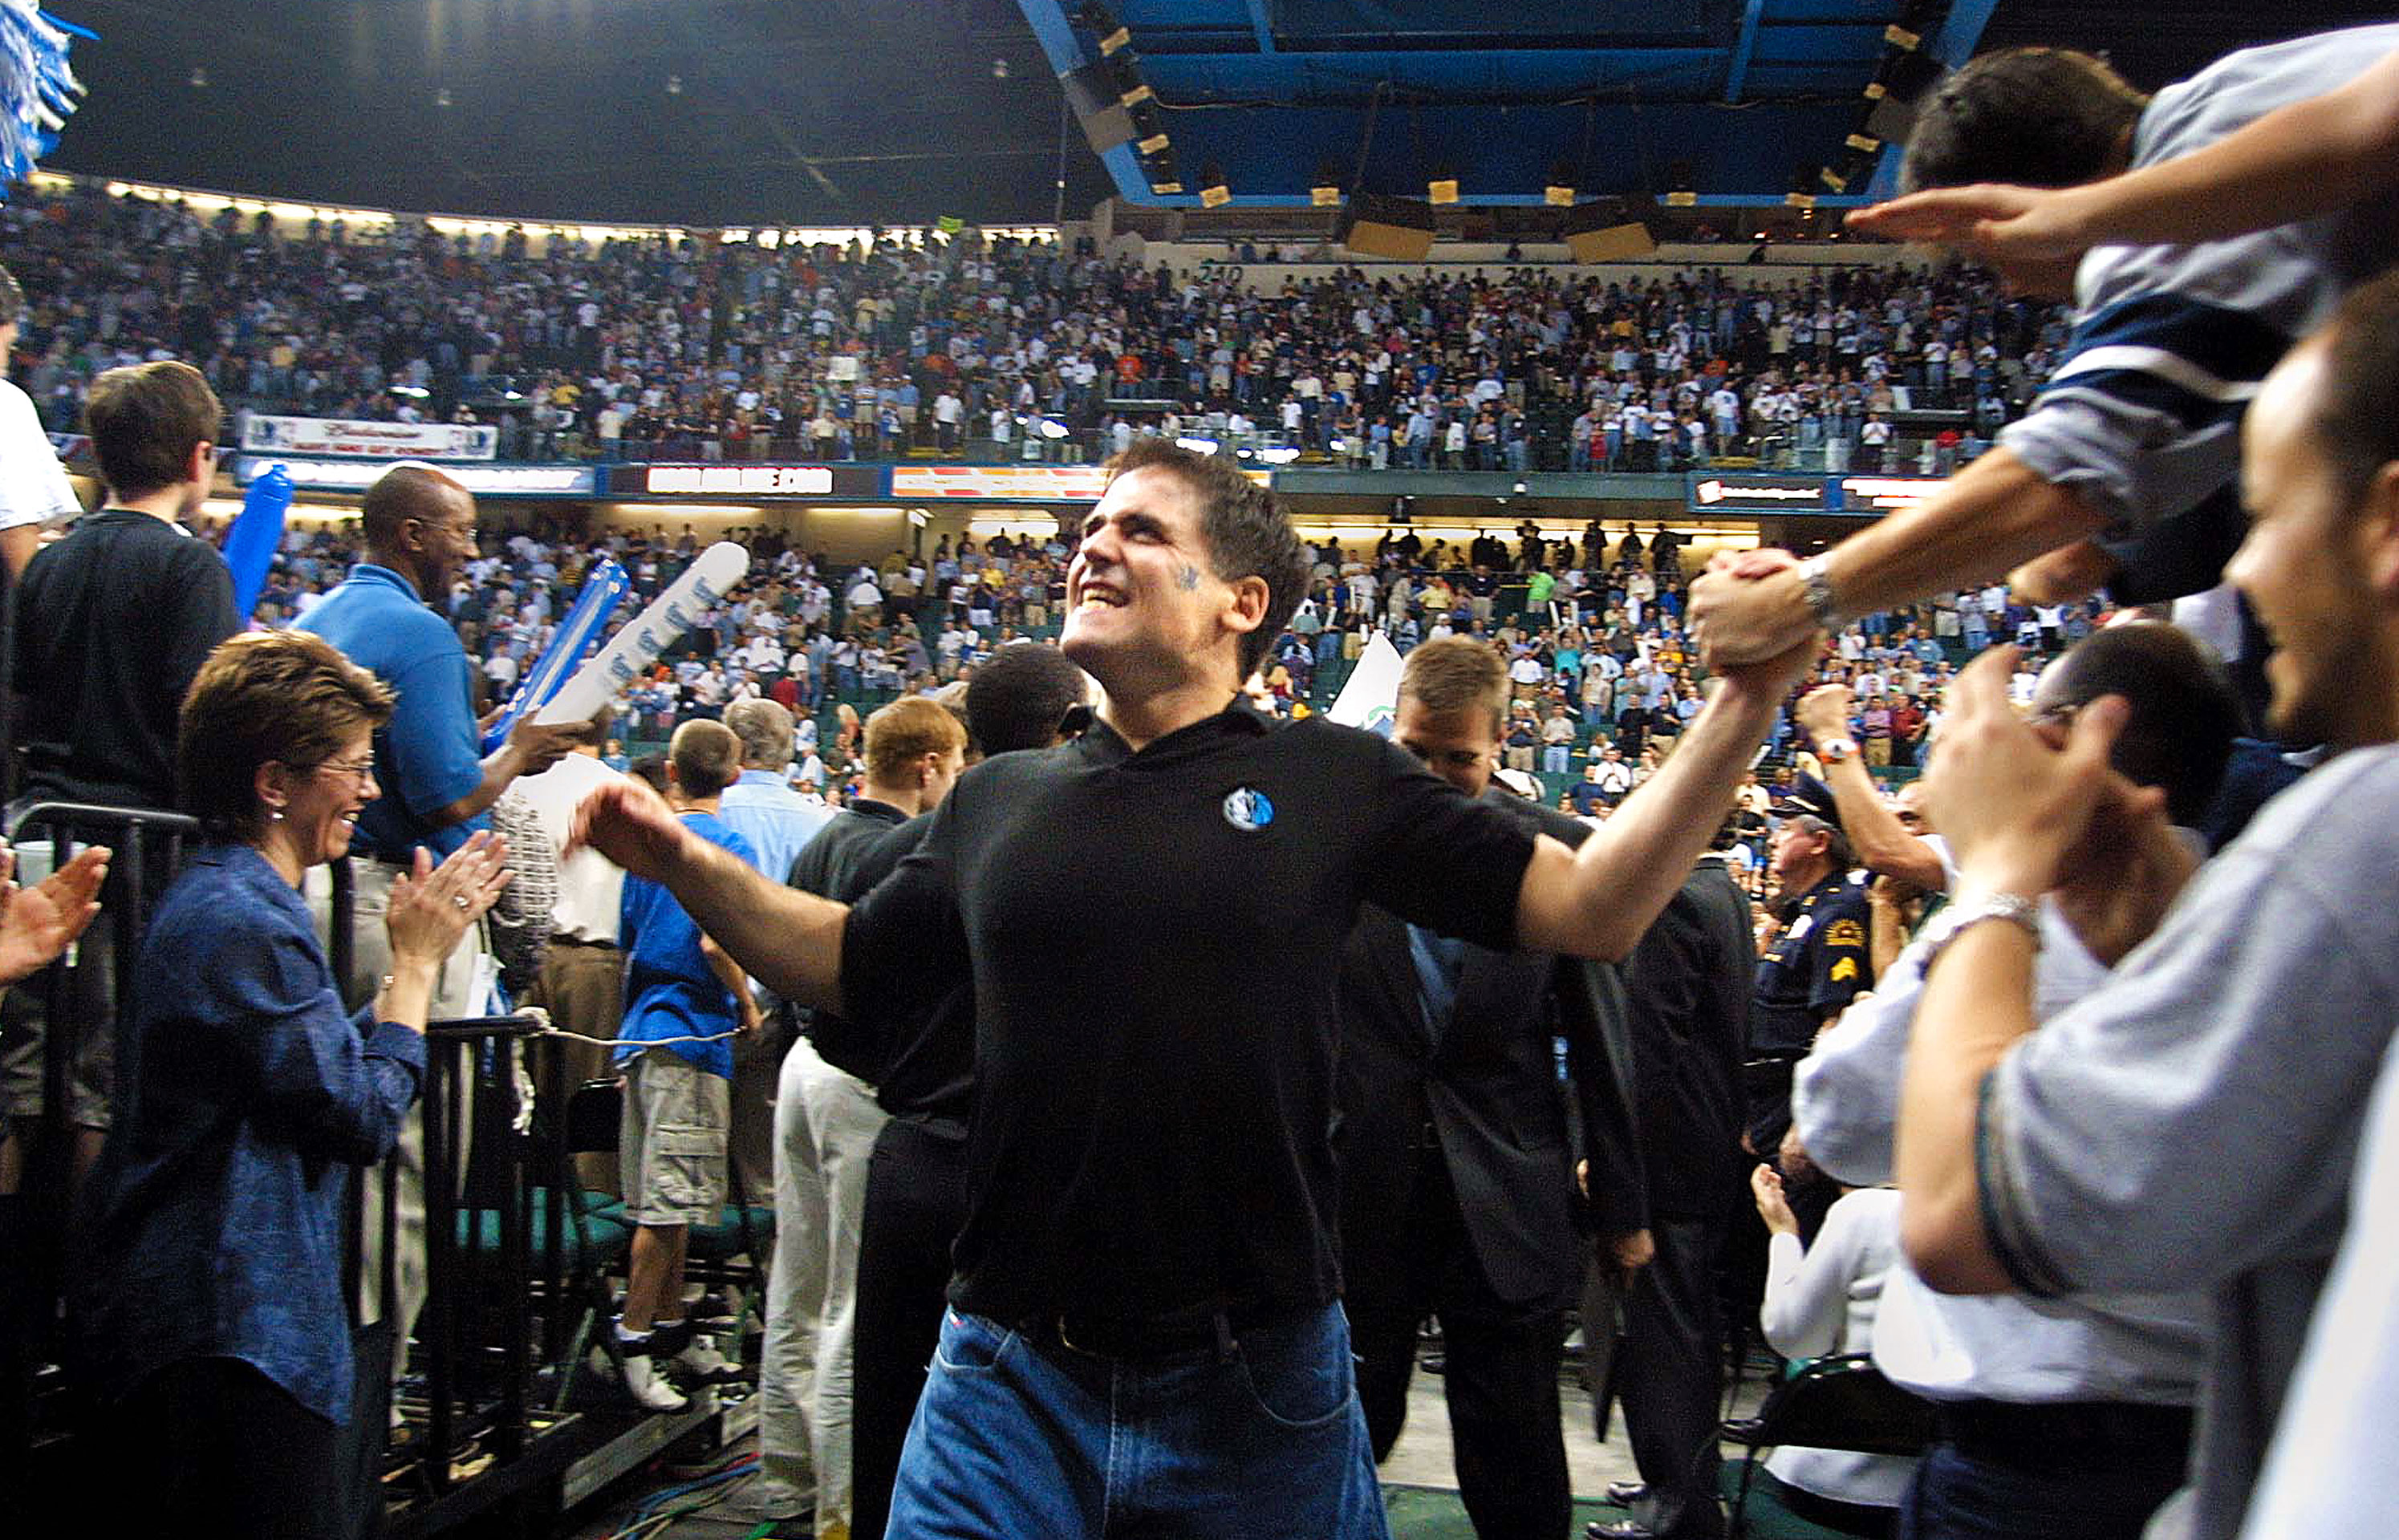 Cuban celebrates with Dallas fans in 2001 following a Mavericks home win over the Utah Jazz.